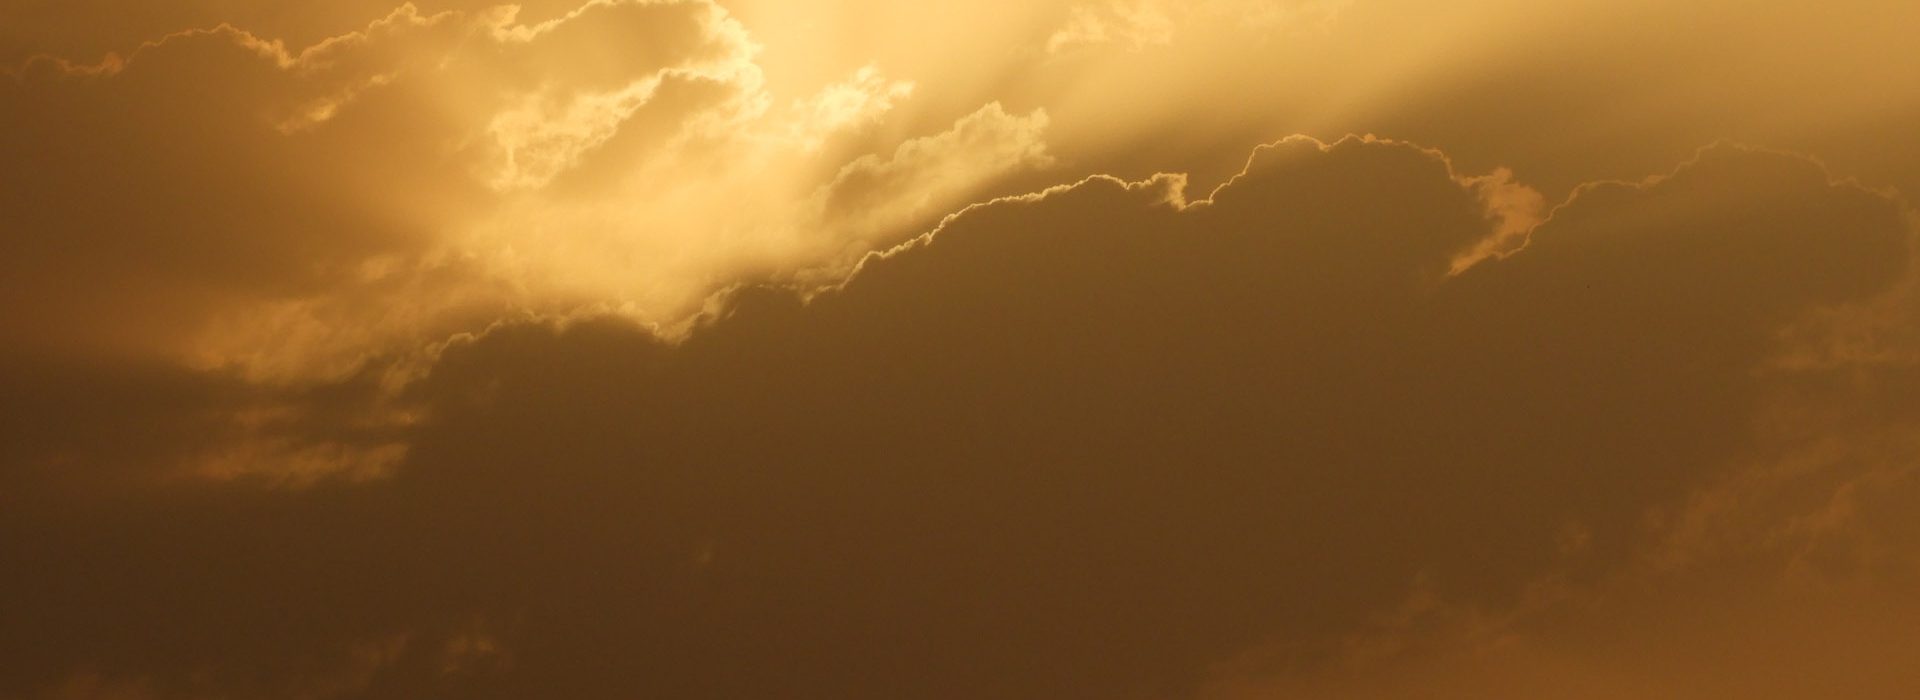 Clouds with golden sun rays